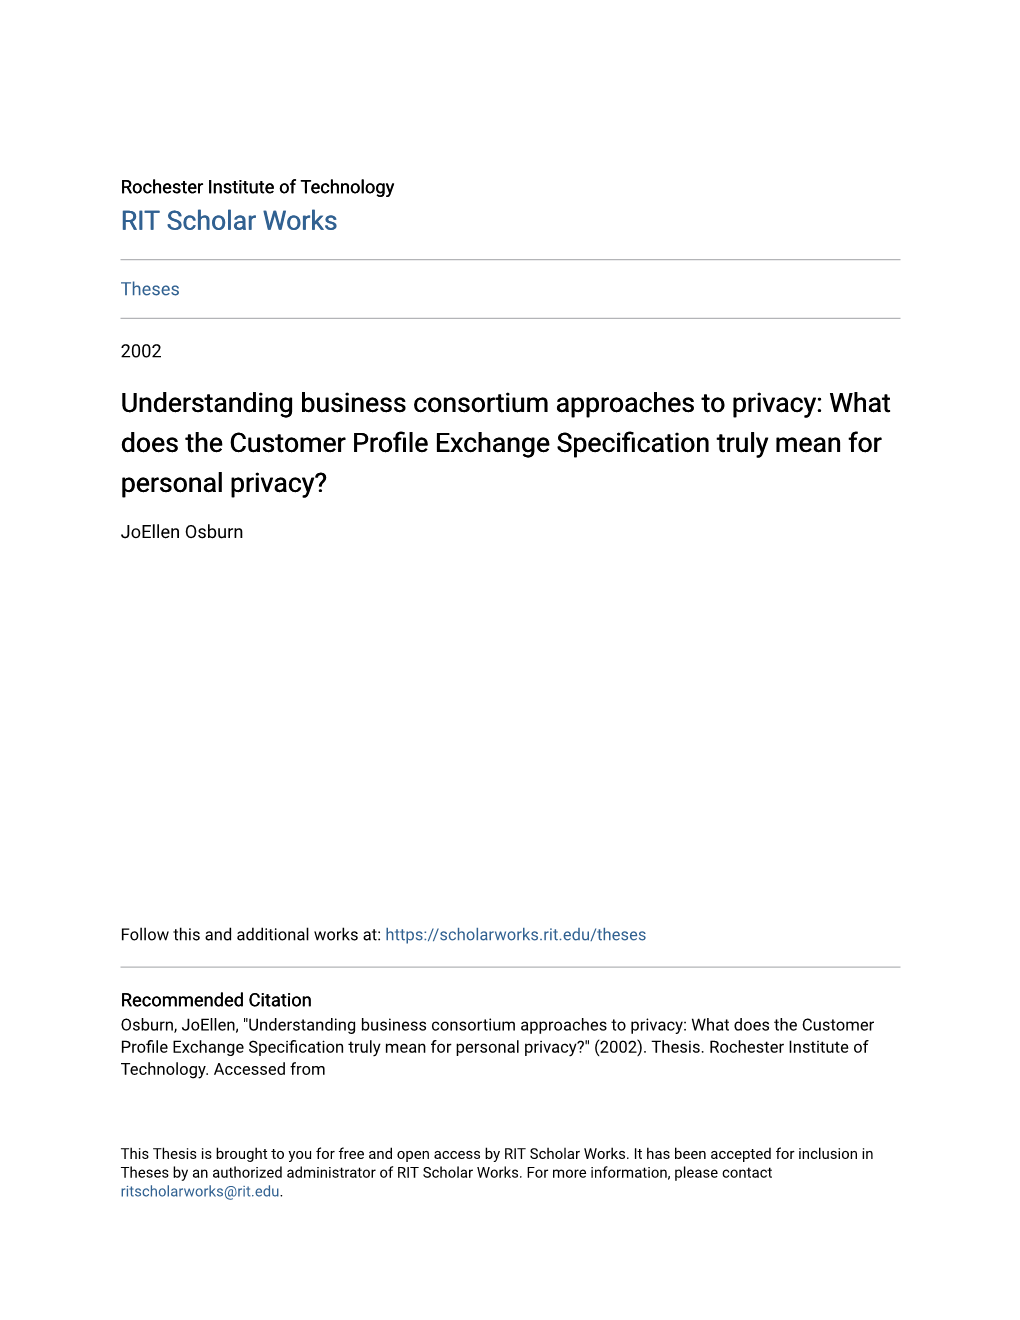 Understanding Business Consortium Approaches to Privacy: What Does the Customer Profile Exchange Specification Truly Mean for Personal Privacy?